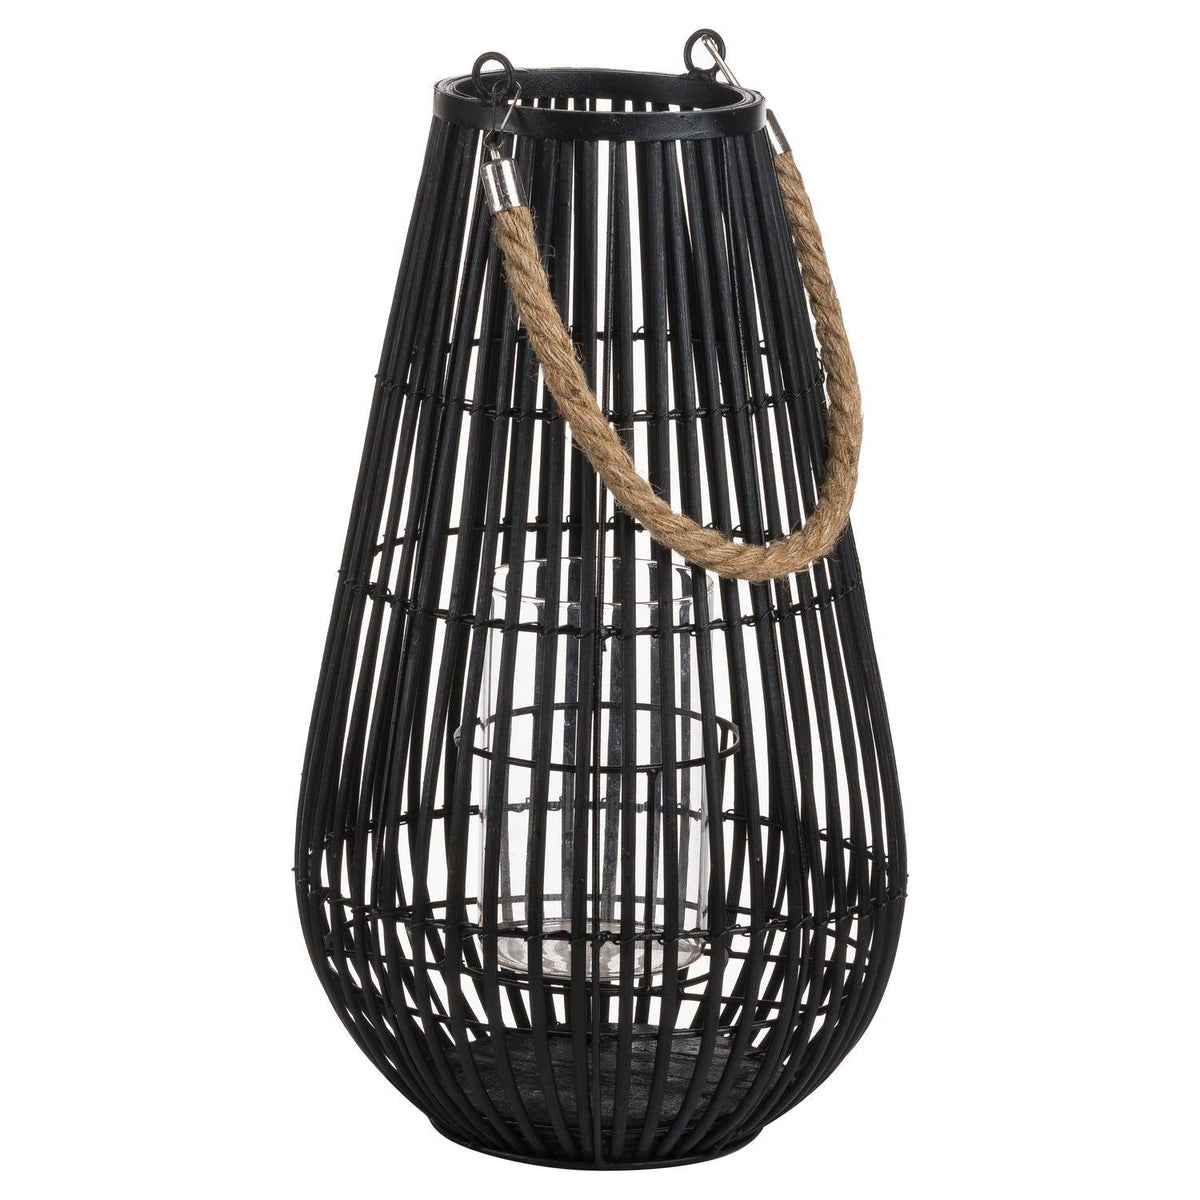 Domed Rattan Lantern With Rope Detail - Vookoo Lifestyle